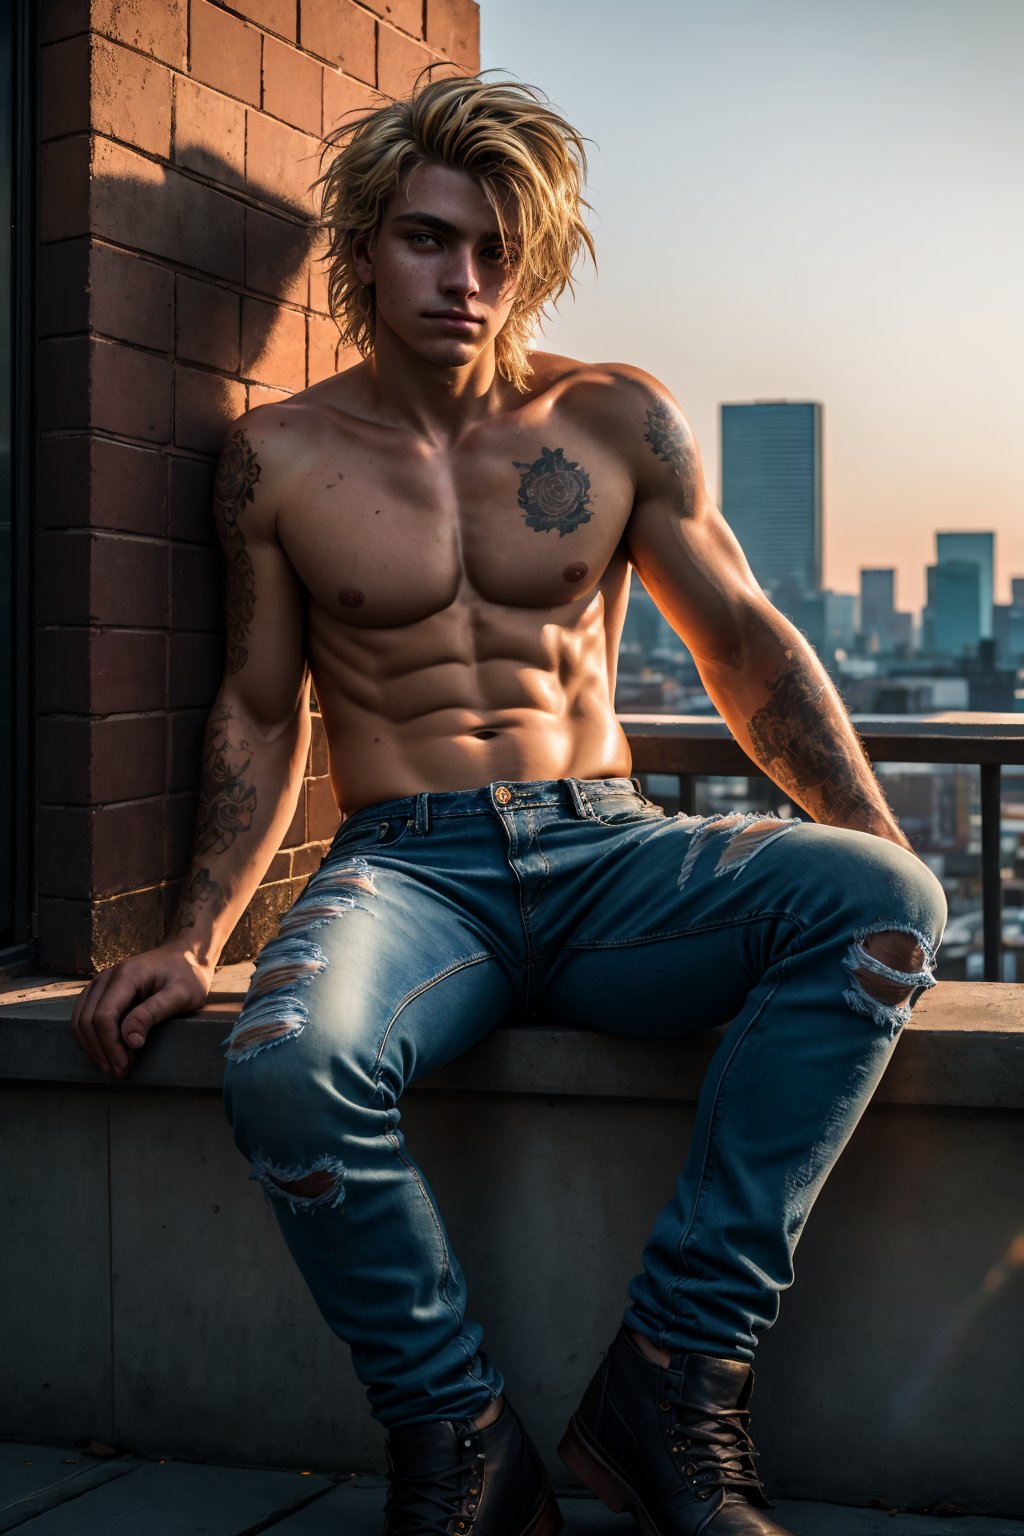 Grunge style 25 year old man,blond hair,glossy eyes,extremely handsome,stubble,skin pores,glossy eyes,(messy hair),shirtless,denim jeans,torn jeans,golden hour,emo,sitting on the ledge of a city rooftop,Thorough,analog style,eye focus,highest quality,(highly detailed skin),perfect face,skin pores,(bokeh:0.6),sharp focus,dappled lighting,(backlighting:0.7),film grain,photographed on a Sony A7R IV,18mm F/1.7 cine lens,(highly detailed, intricately detailed),8k,HDR,front view,(upper body:0.9),, Thorough,analog style,female focus,highest quality,(highly detailed skin),perfect face,skin pores,(bokeh:0.6),sharp focus,dappled lighting,(backlighting:0.7),film grain,photographed on a Sony A7R IV,18mm F/1.7 cine lens,(highly detailed, intricately detailed),8k,HDR,front view,(full body visible:1.2) . Textured, distressed, vintage, edgy, punk rock vibe, dirty, noisy